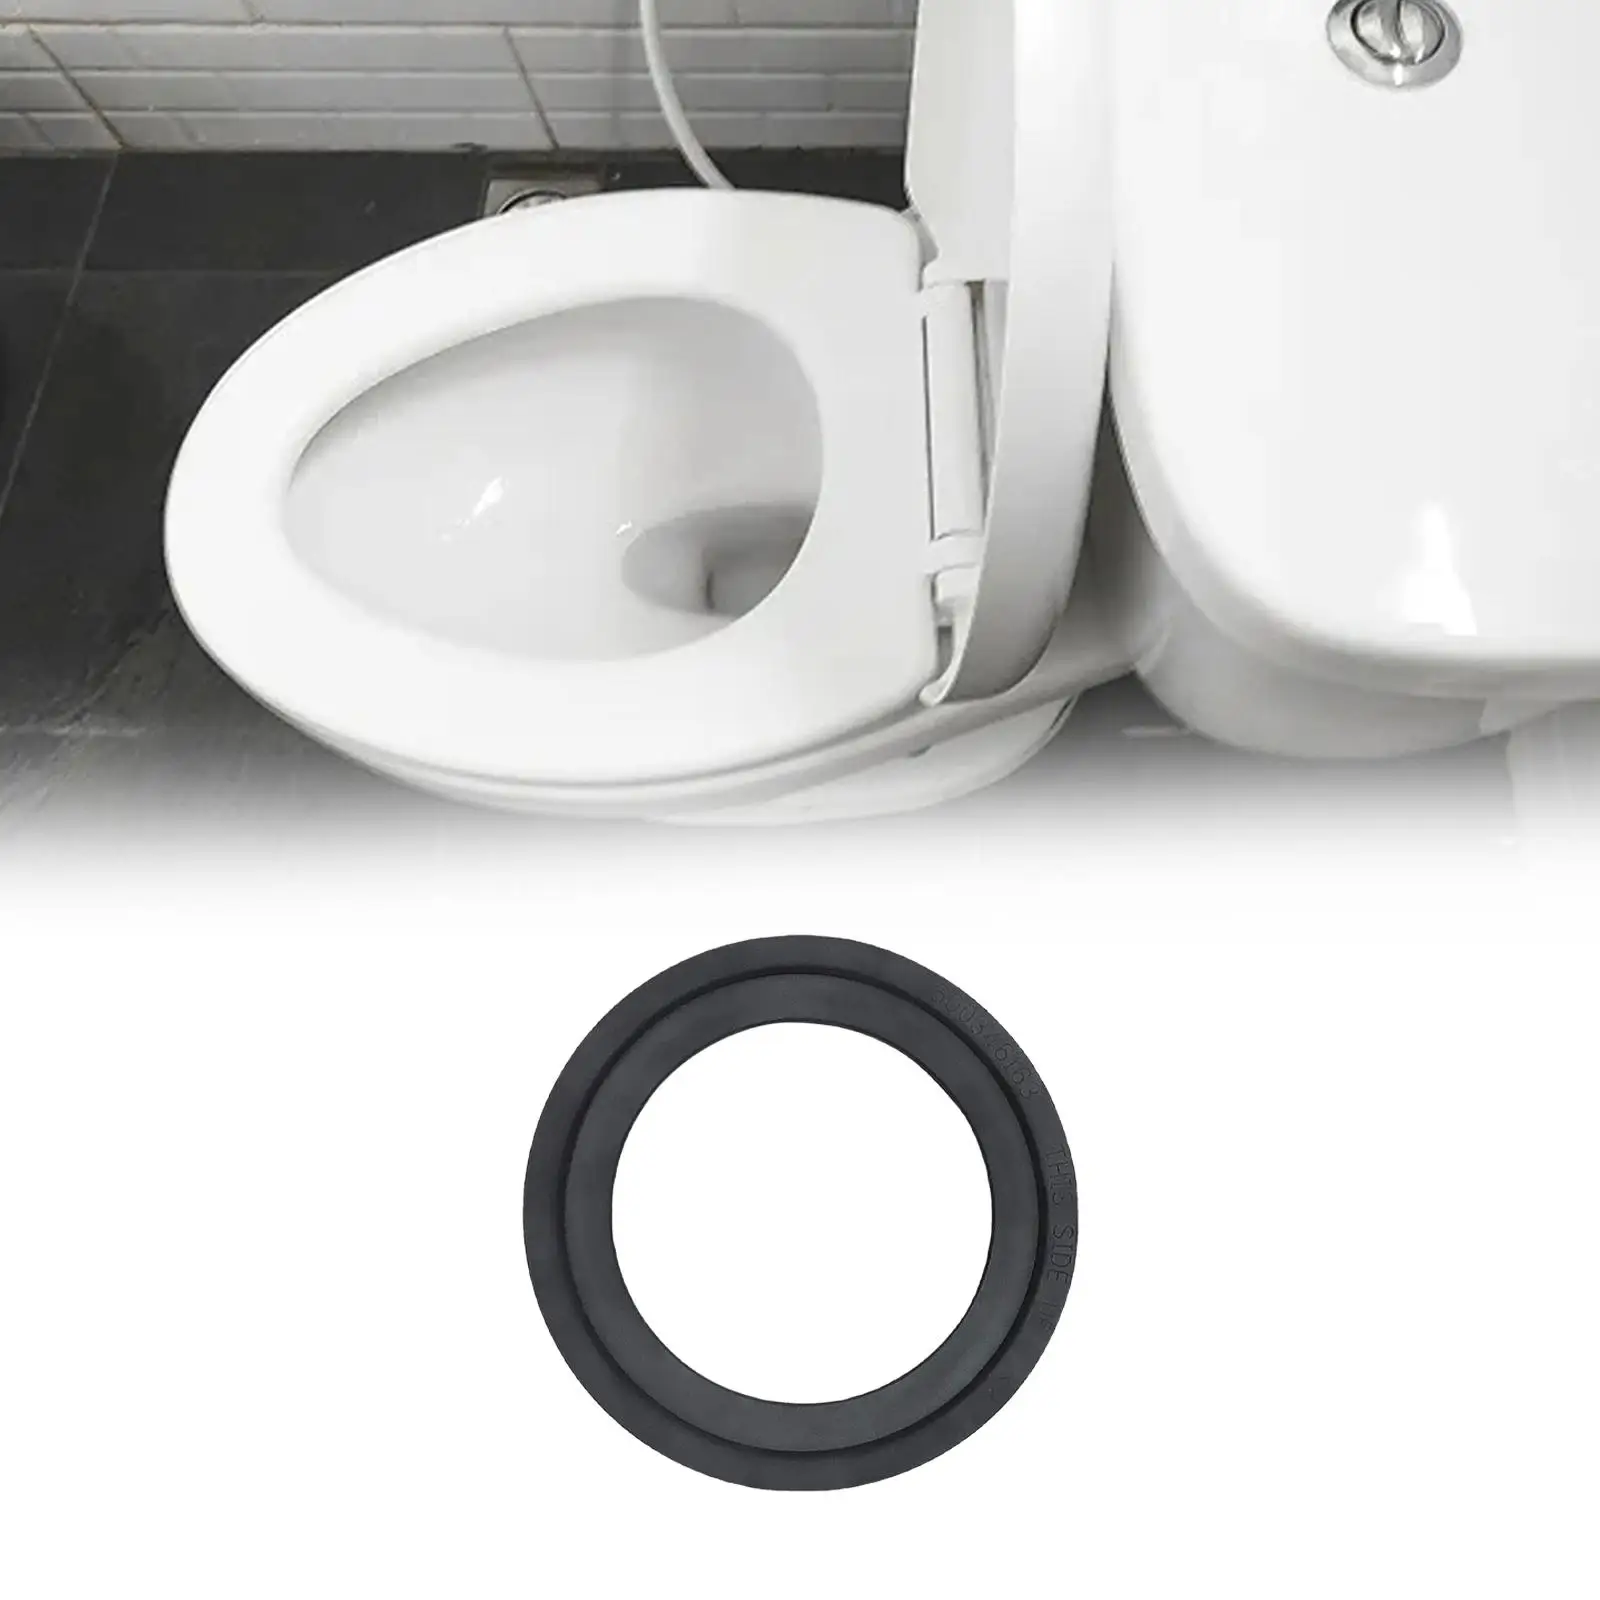 RV Toilet Flush Seal Gaskets for Dometic 300 310 320 RV Toilet High Performance Solve The Leakage Problem